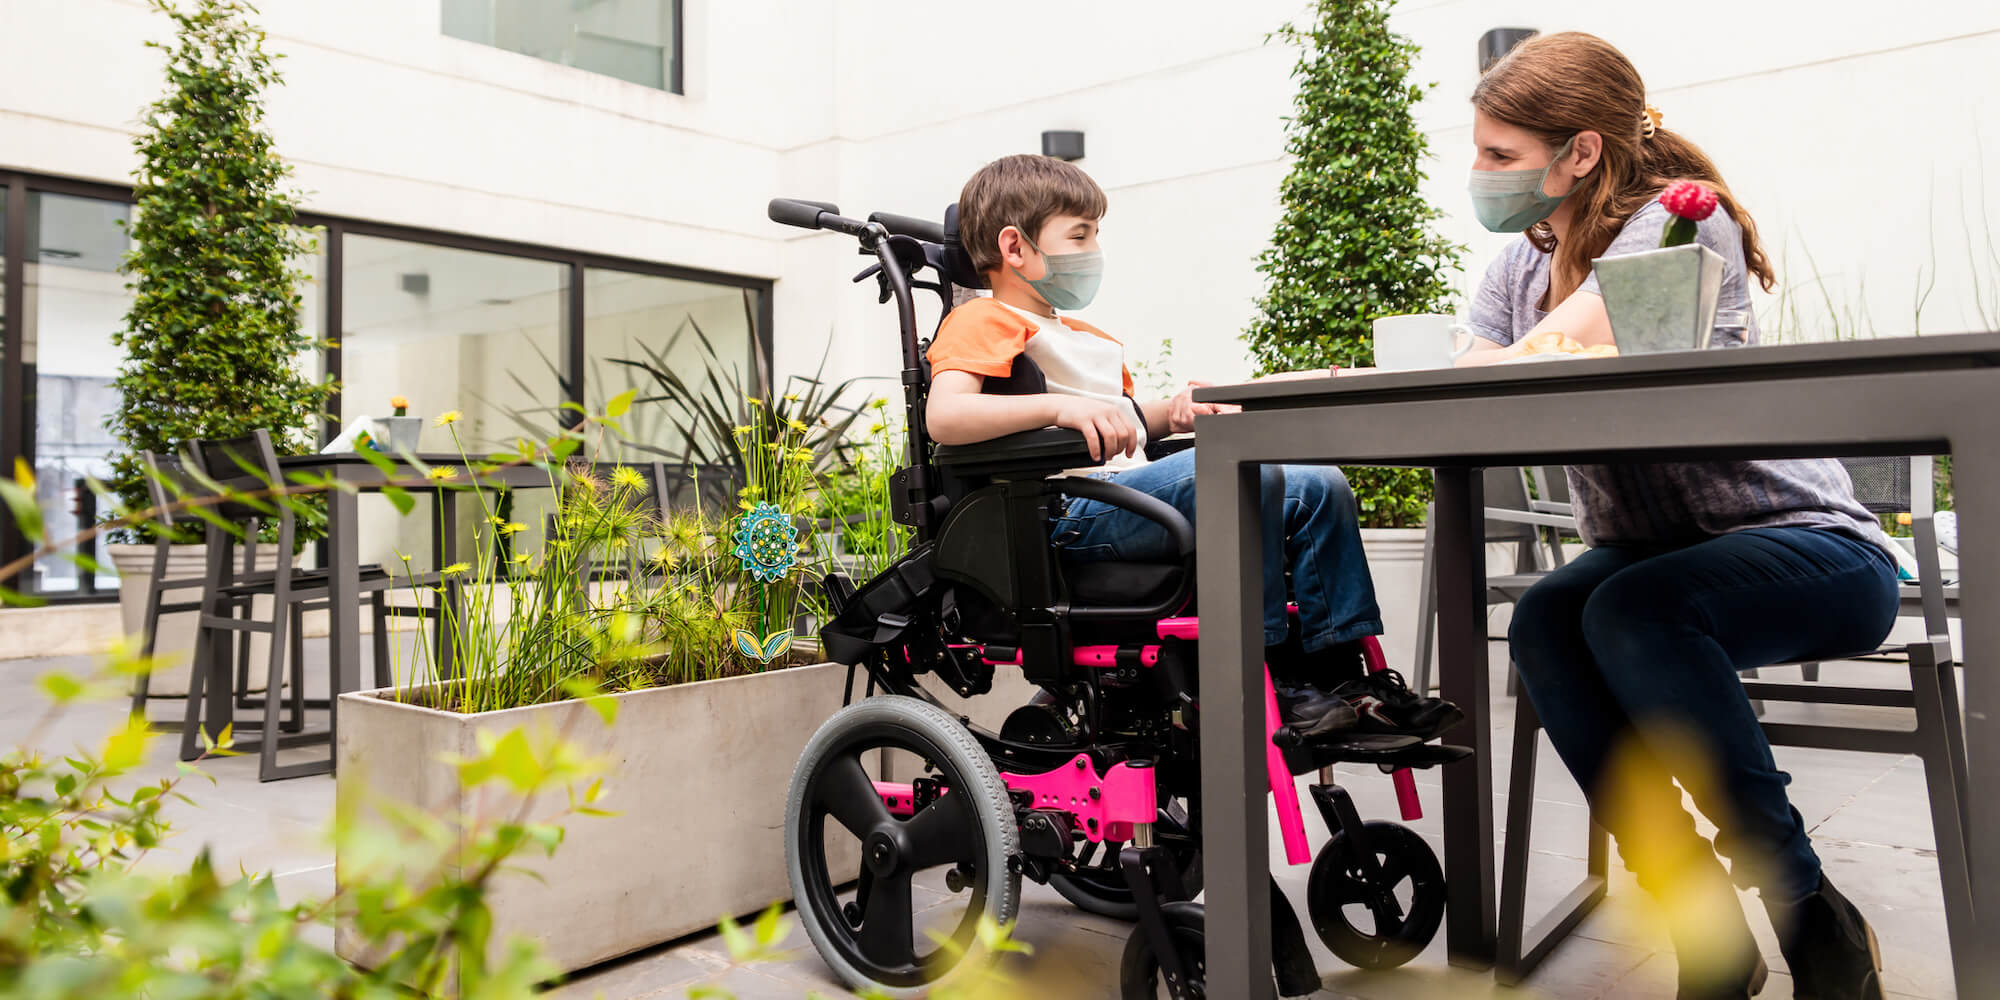 The photo shows a young boy in a wheelchair sitting at a table in a garden with a young woman. Image is from iStock-1280050807 